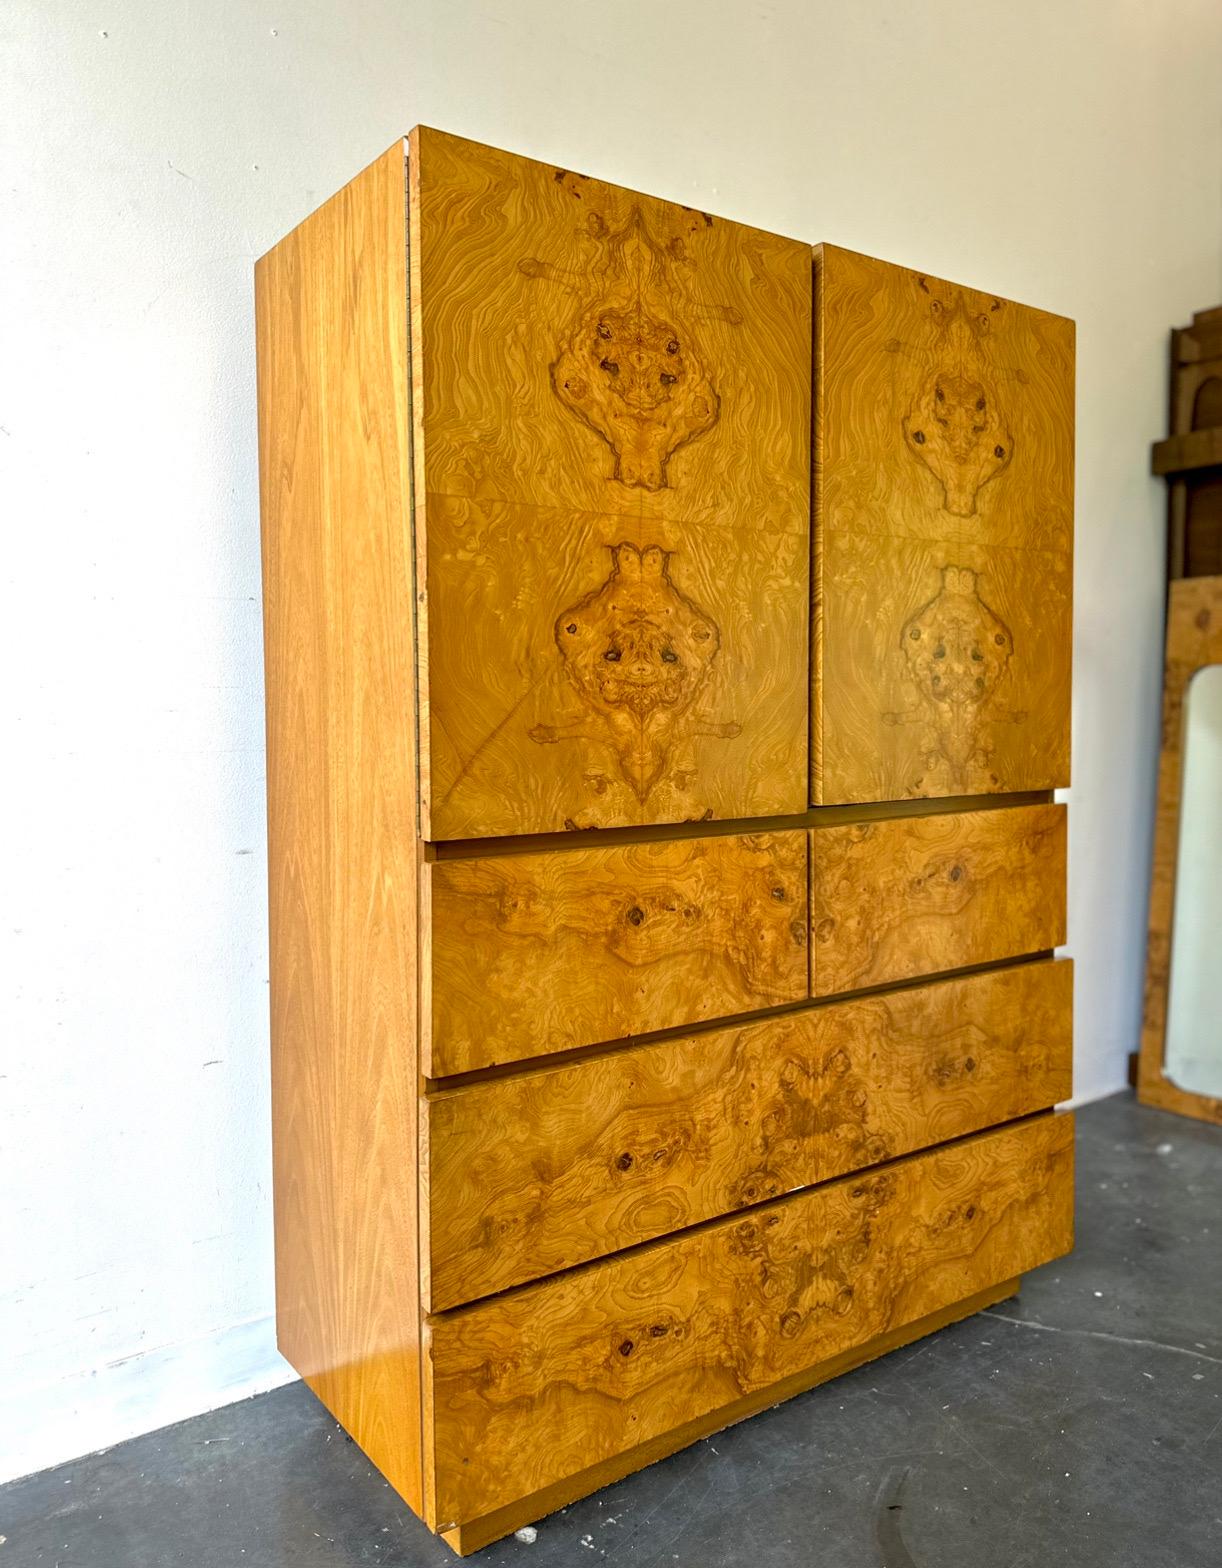 Roland Carter for Lane , circa 1970.

Outstanding Burl Wood highboy dresser in the manner of Milo Baughman.

Five spacious drawers, gorgeous wood grain, and lane furniture quality.
